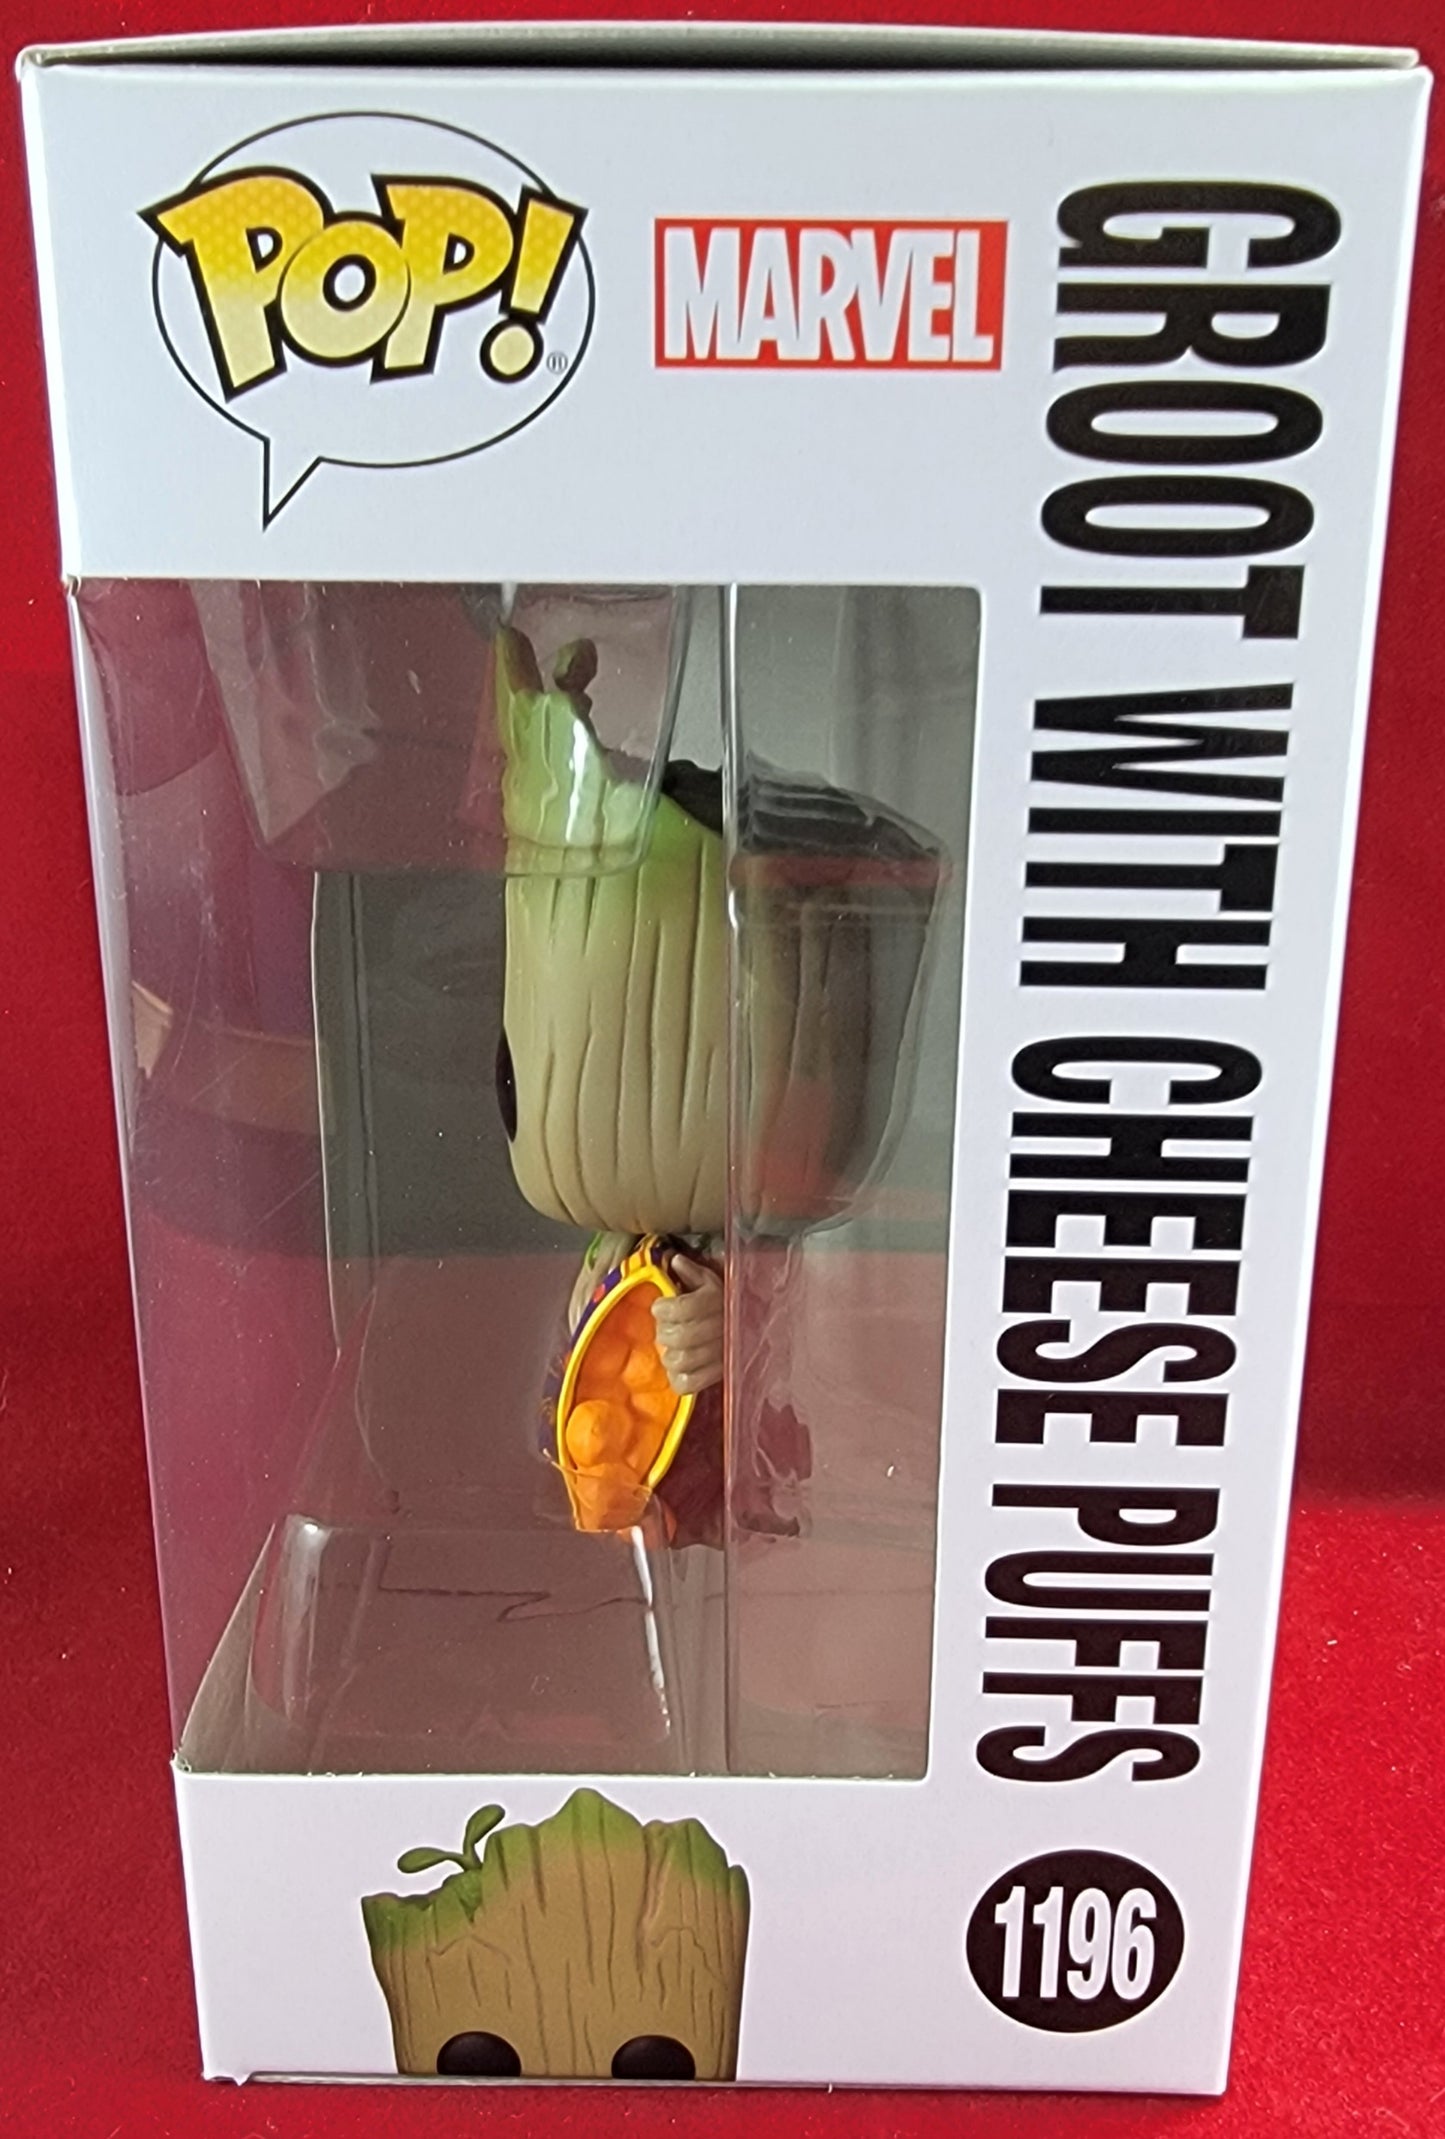 Groot with cheese puffs funko # 1196 (nib)
With pop protector